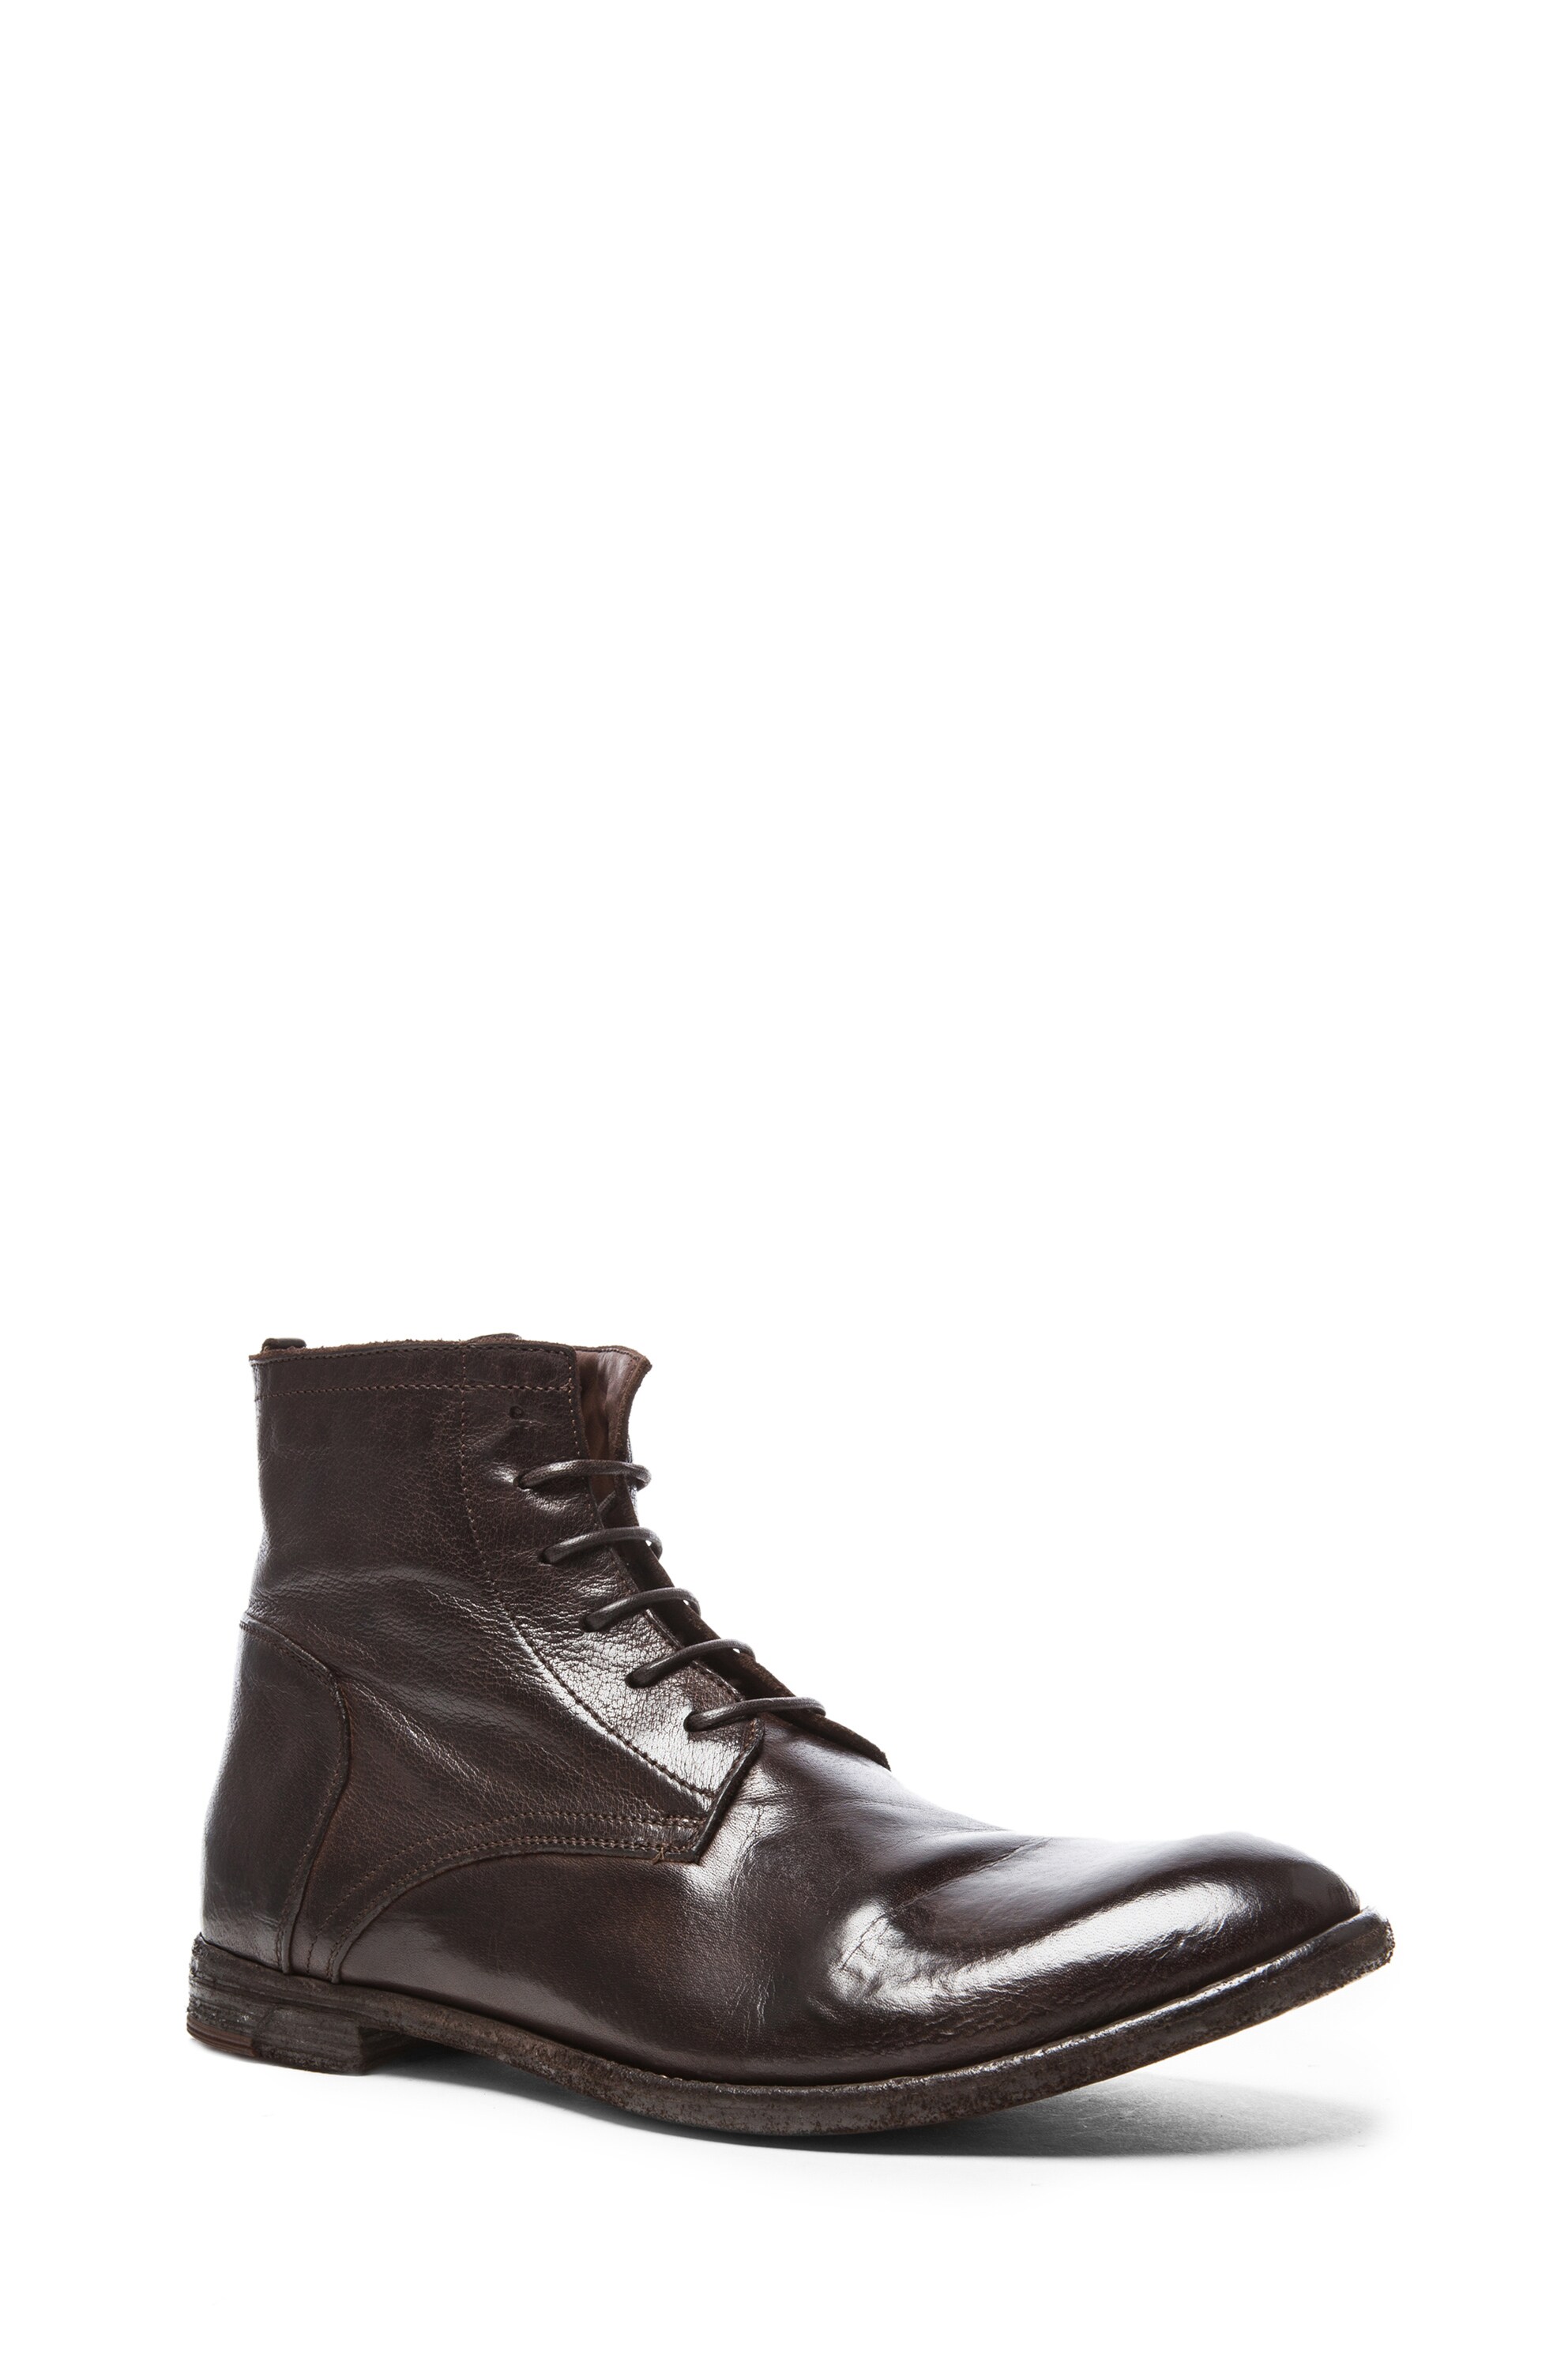 Image 1 of Officine Creative Work Leather Boots in Tinto Java